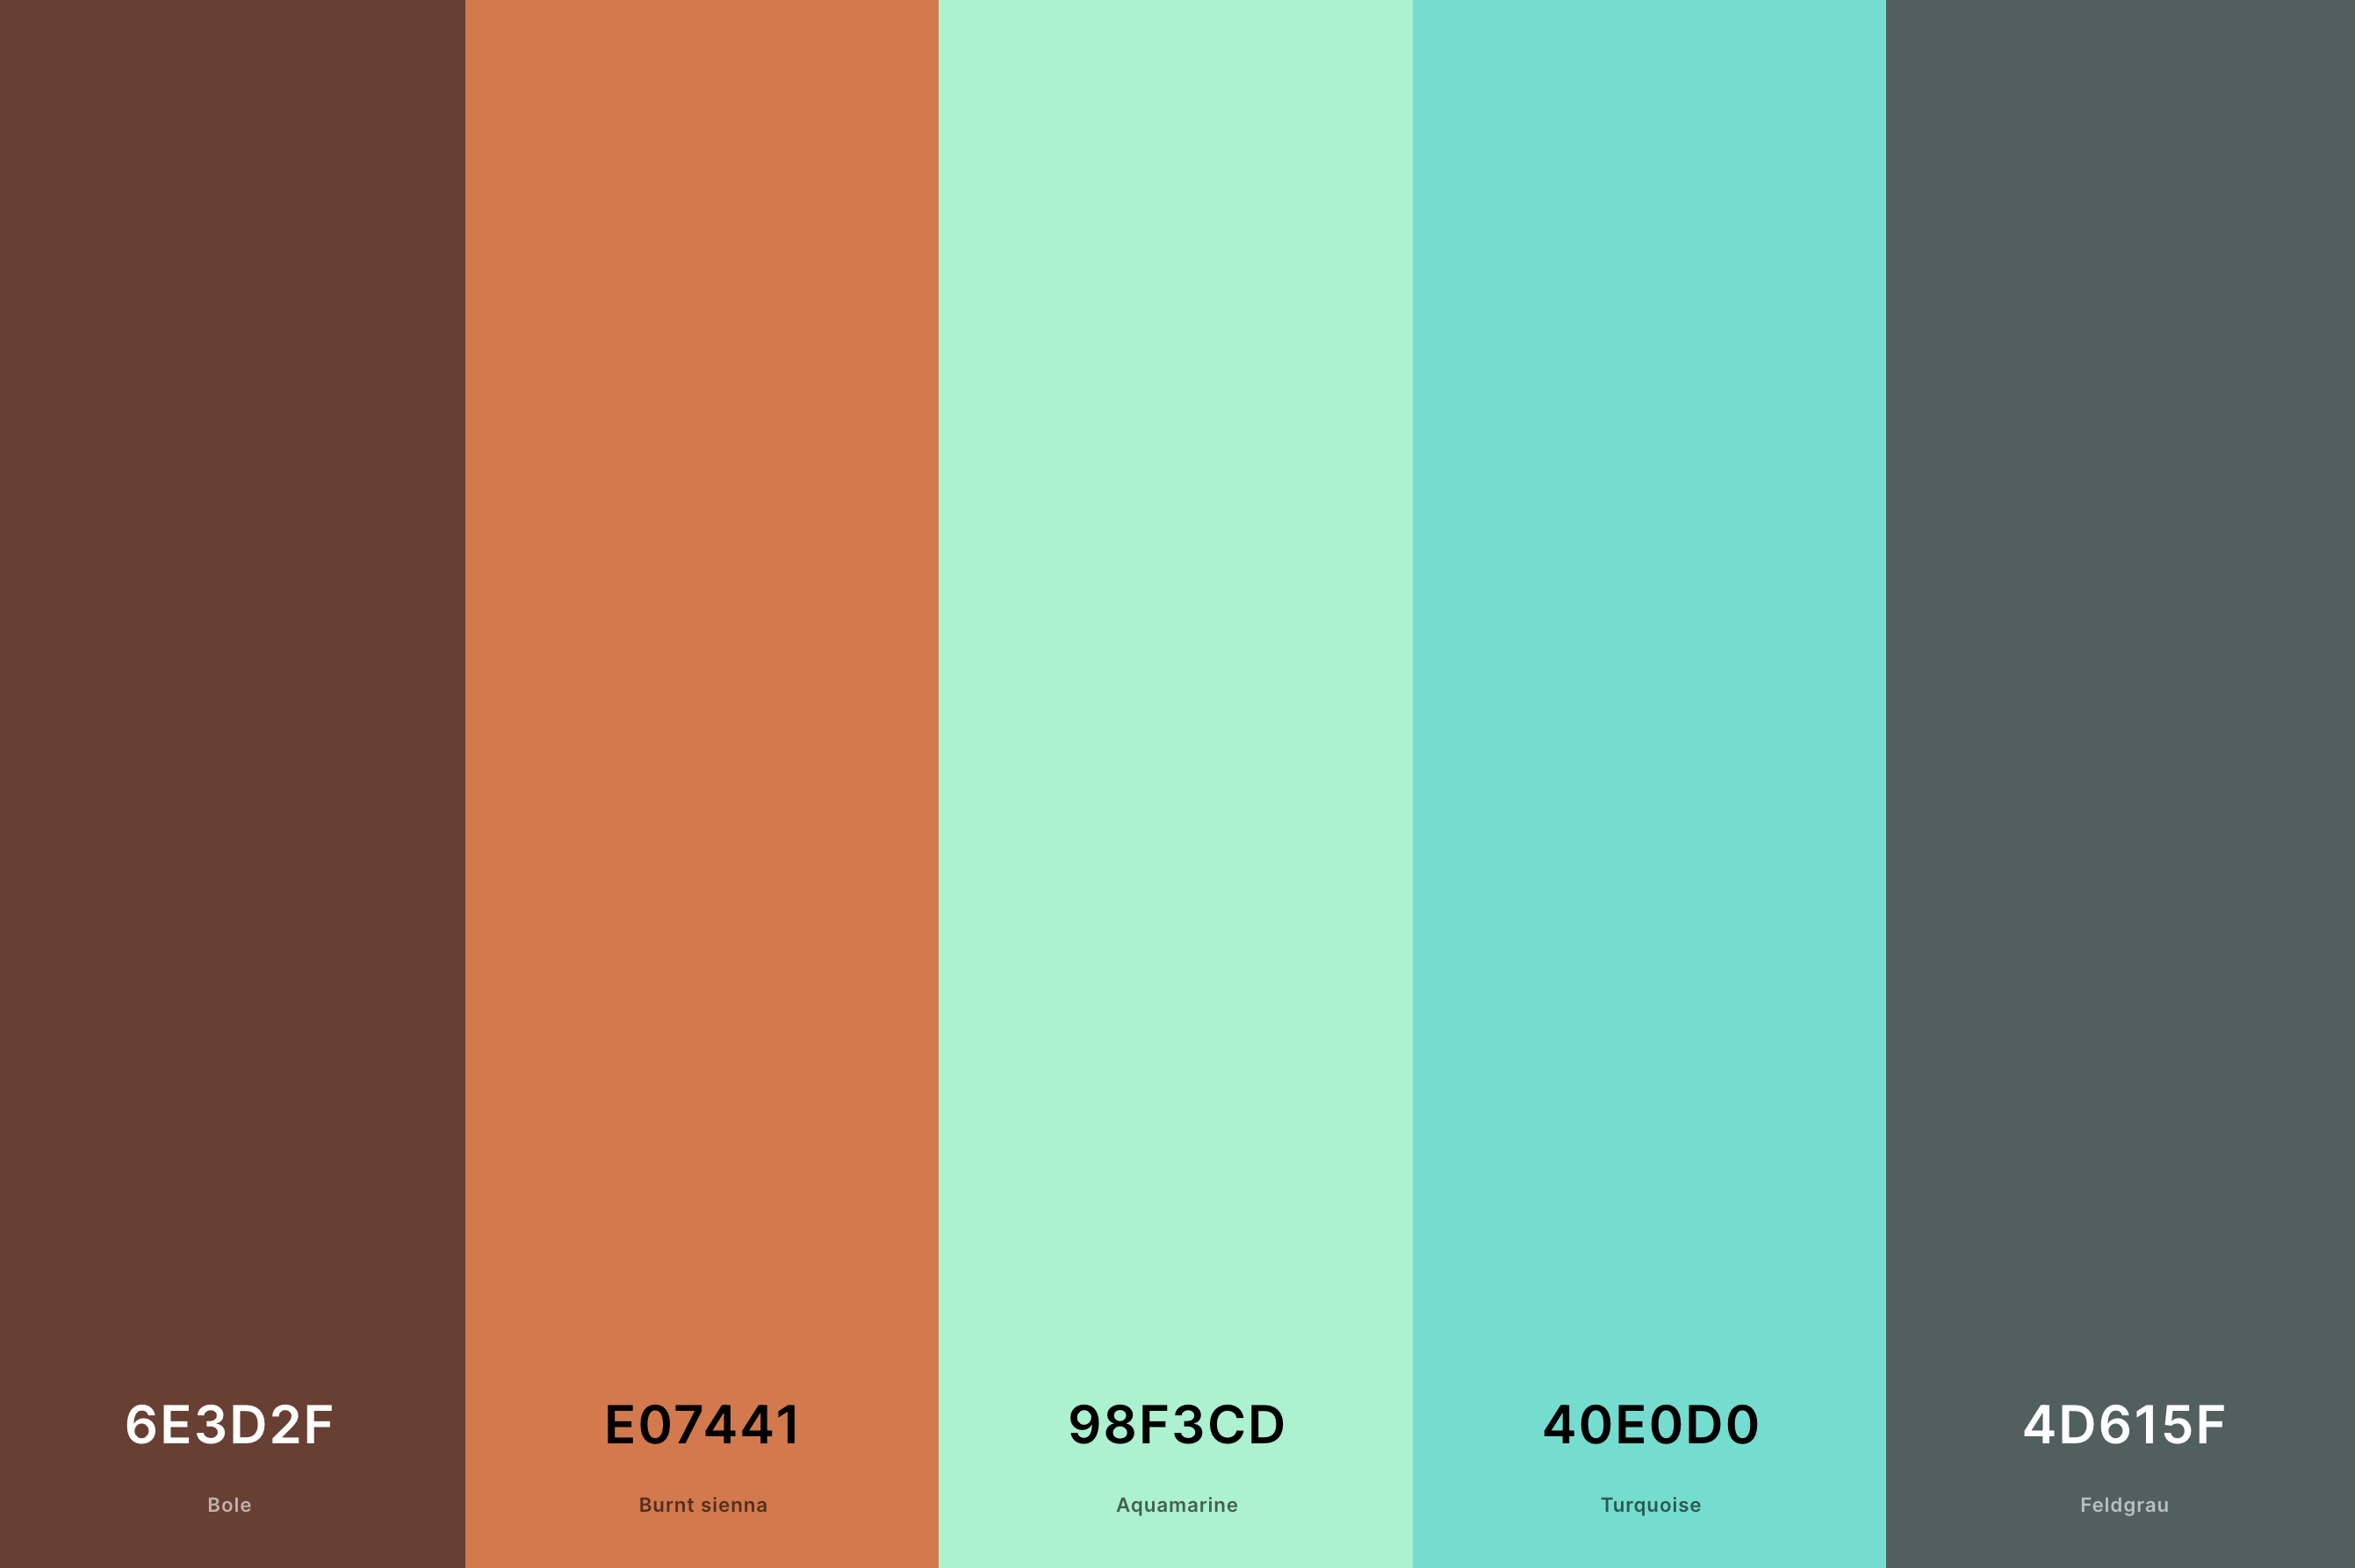 9. Terracotta And Turquoise Color Palette Color Palette with Bole (Hex #6E3D2F) + Burnt Sienna (Hex #E07441) + Aquamarine (Hex #98F3CD) + Turquoise (Hex #40E0D0) + Feldgrau (Hex #4D615F) Color Palette with Hex Codes